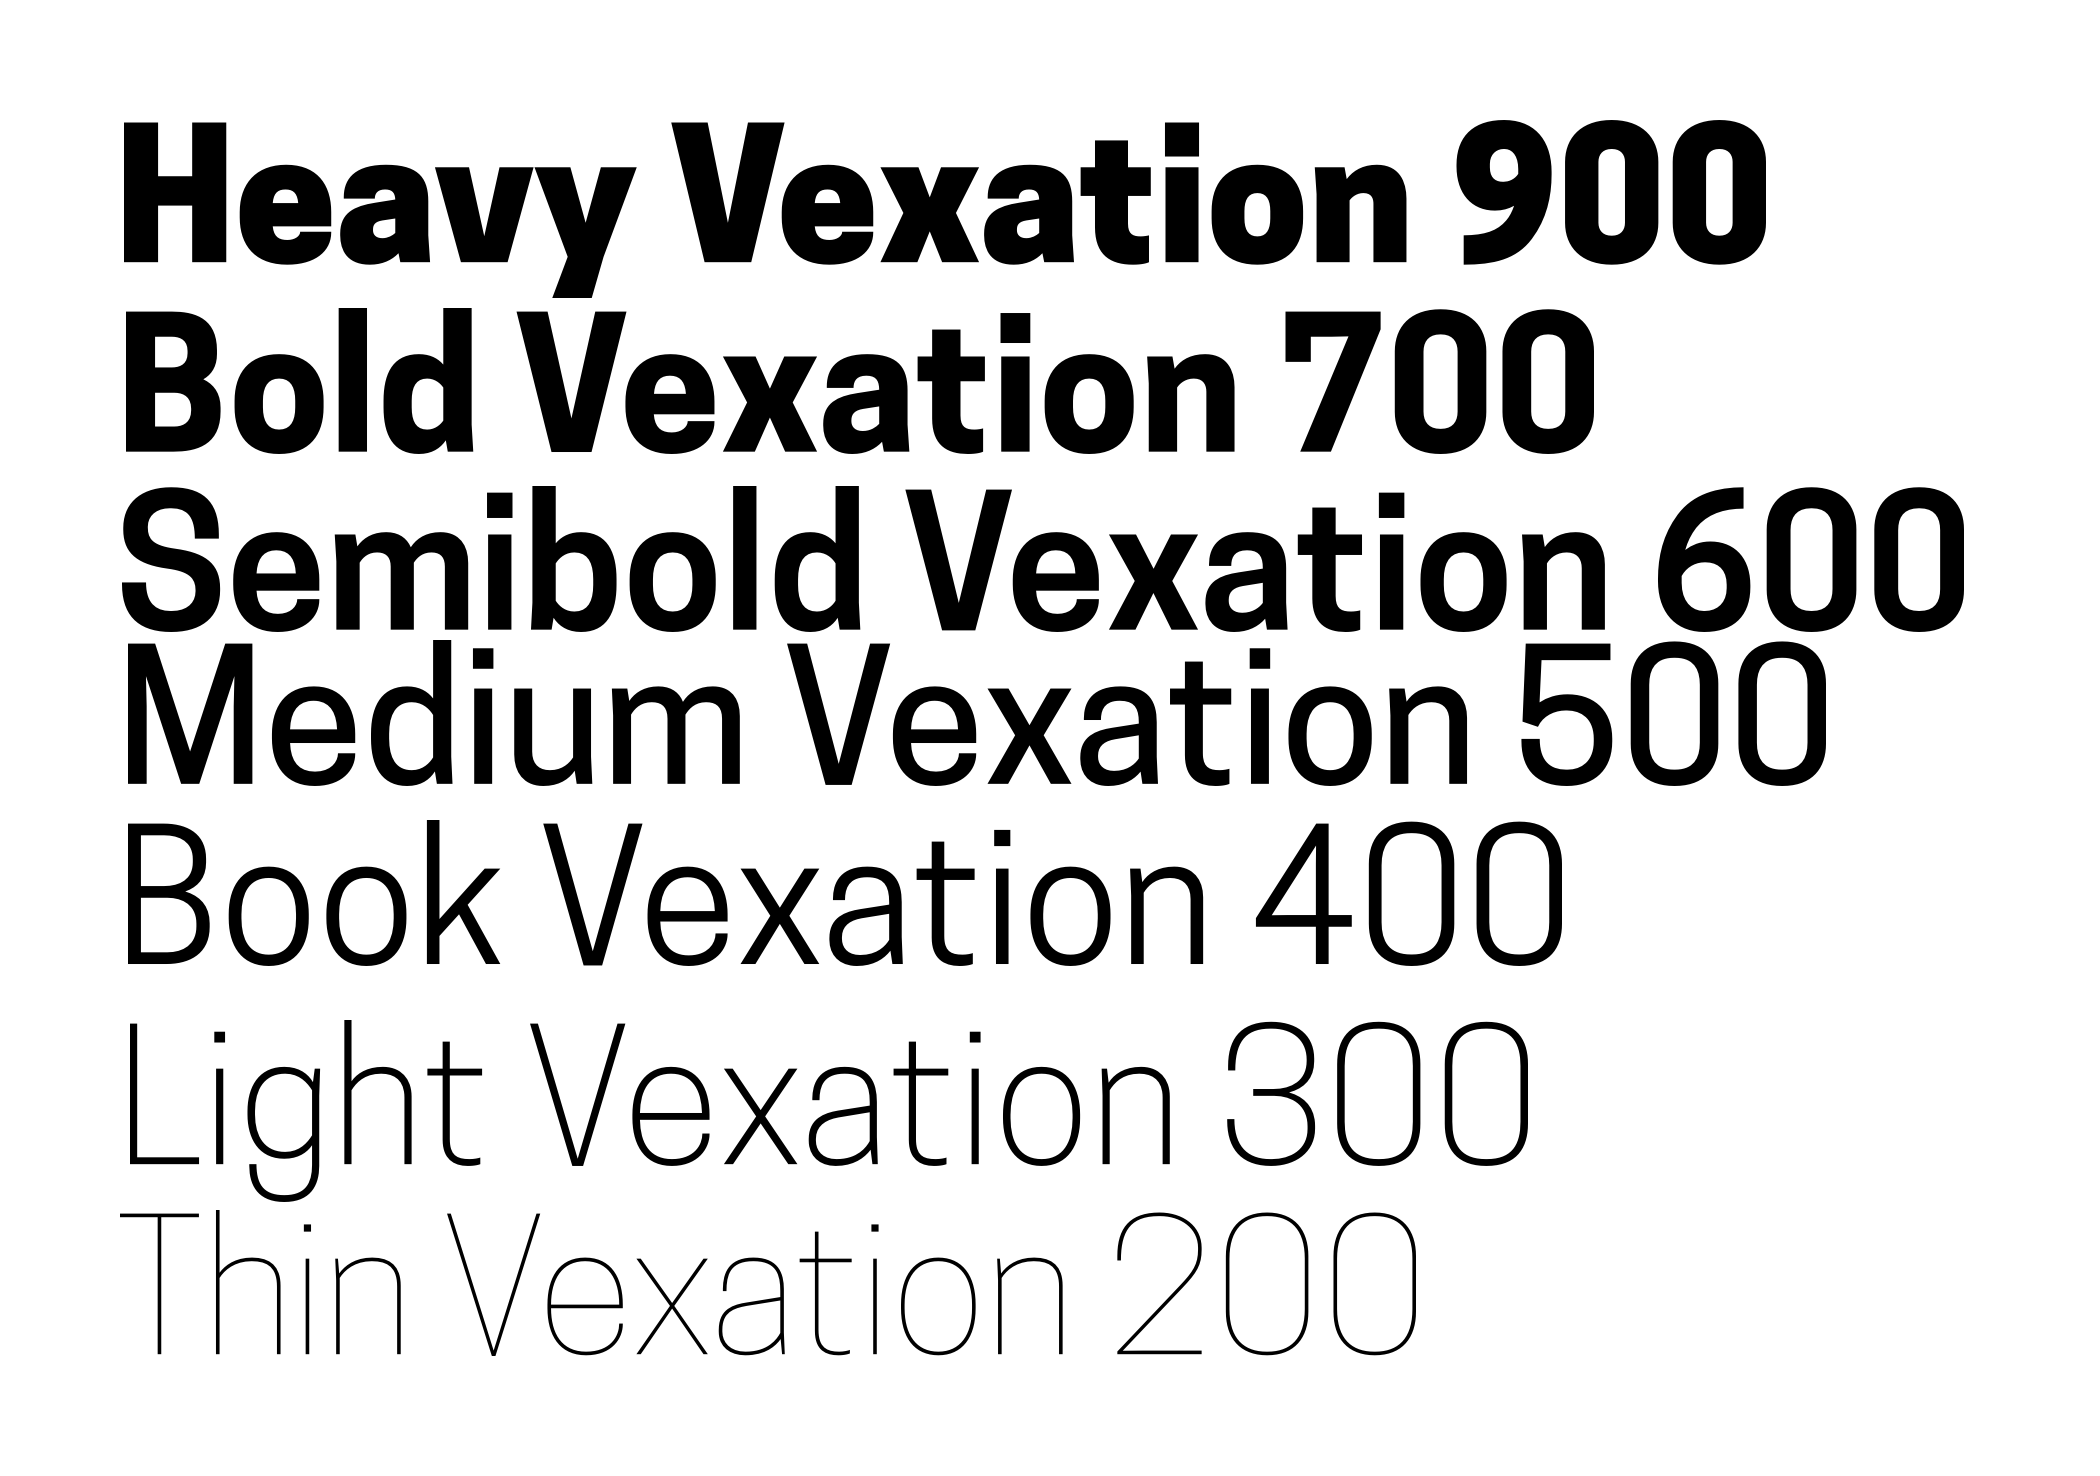 Comparing Cooper Hewitt and all its different weights from the Heavy 900 to the Thin 100.